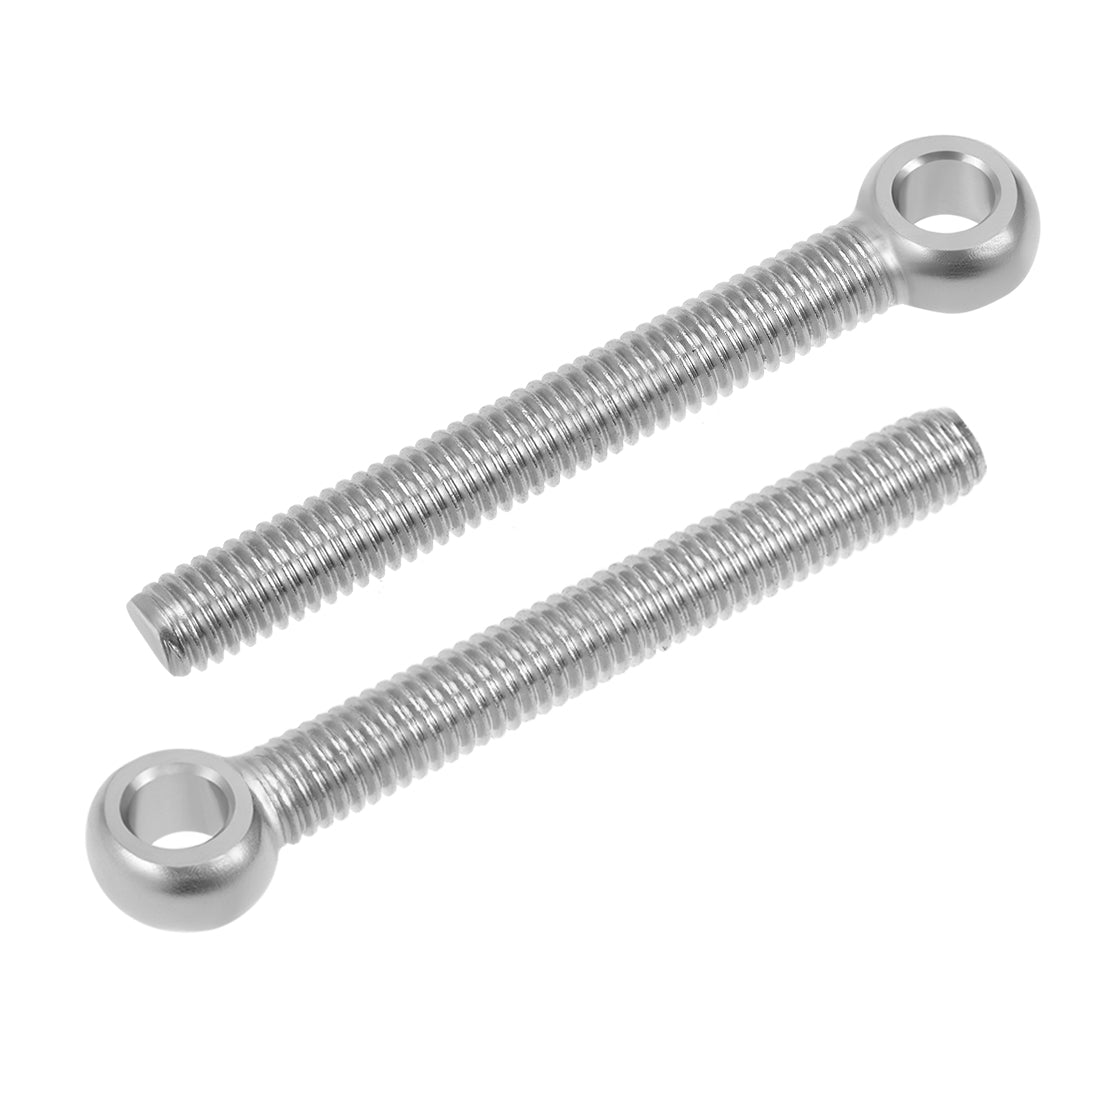 uxcell Uxcell M6 x 50mm Machinery Shoulder Swing Lifting Eye Bolt 304 Stainless Steel Metric Thread 10pcs